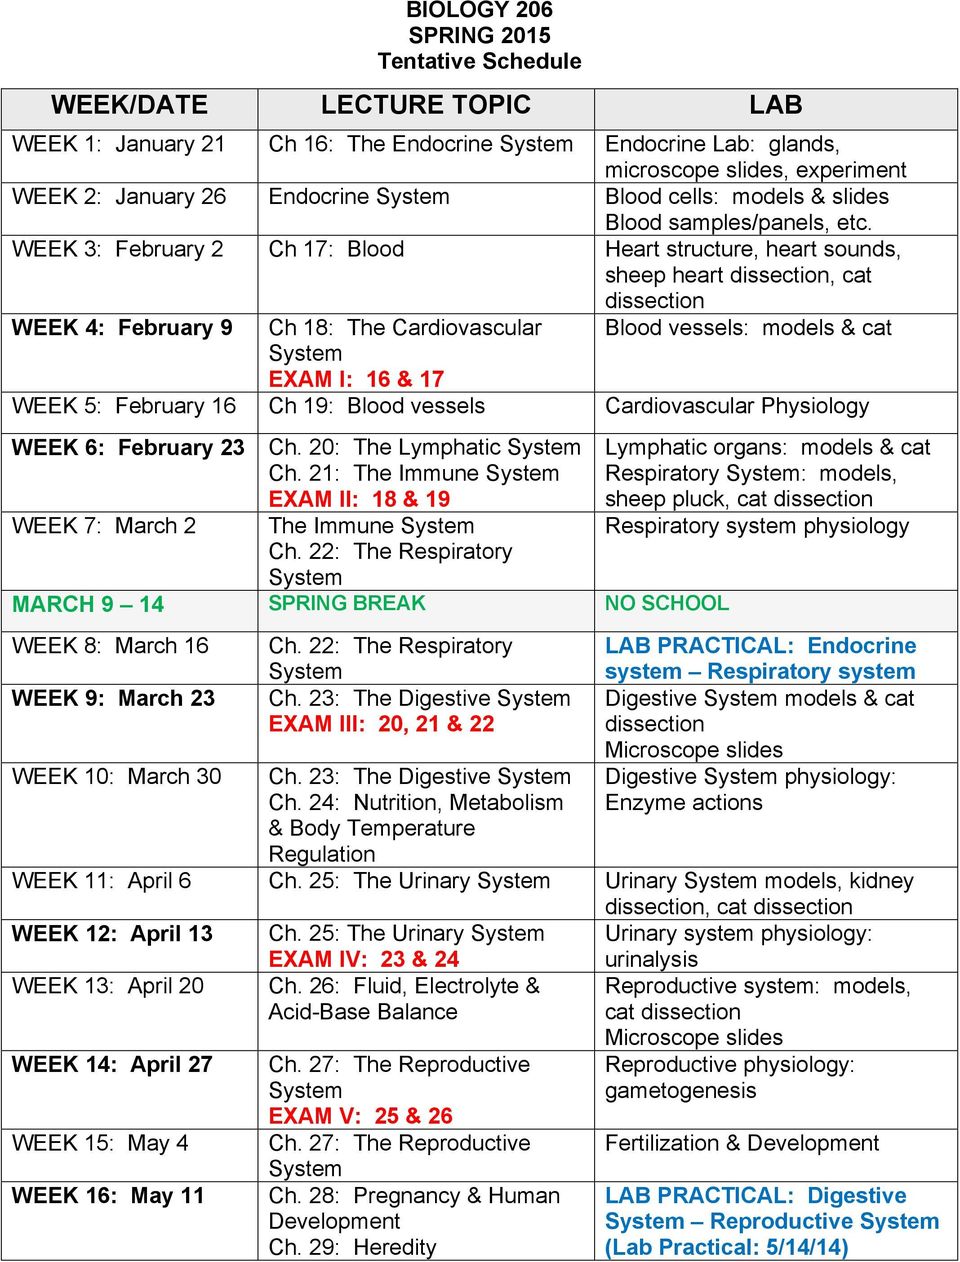 WEEK 3: February 2 Ch 17: Blood Heart structure, heart sounds, sheep heart dissection, cat dissection WEEK 4: February 9 Ch 18: The Cardiovascular Blood vessels: models & cat EXAM I: 16 & 17 WEEK 5: